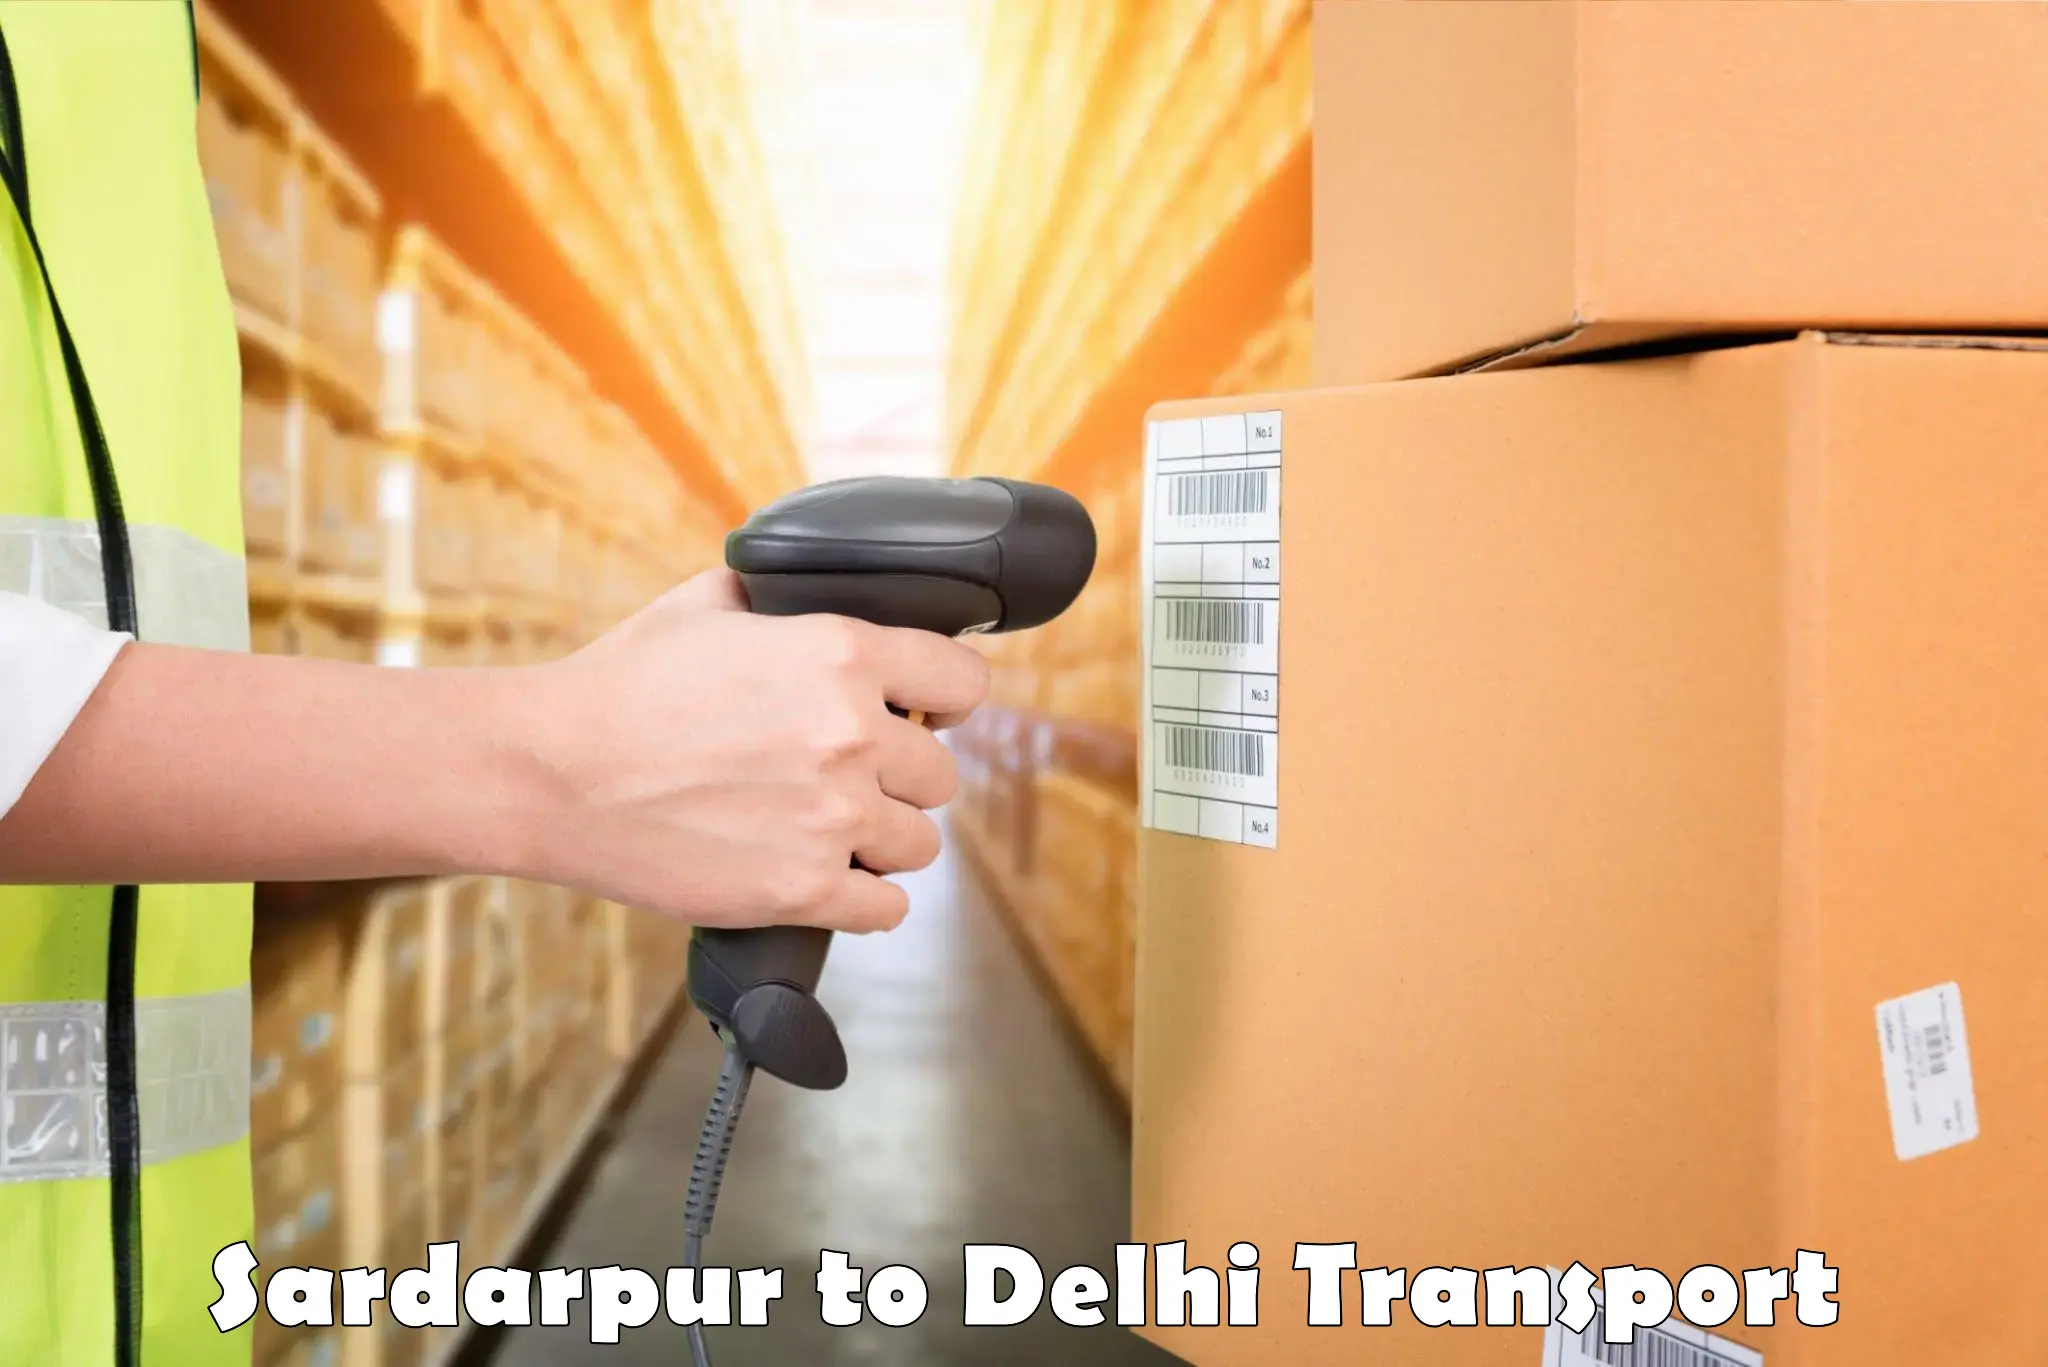 Truck transport companies in India Sardarpur to NCR